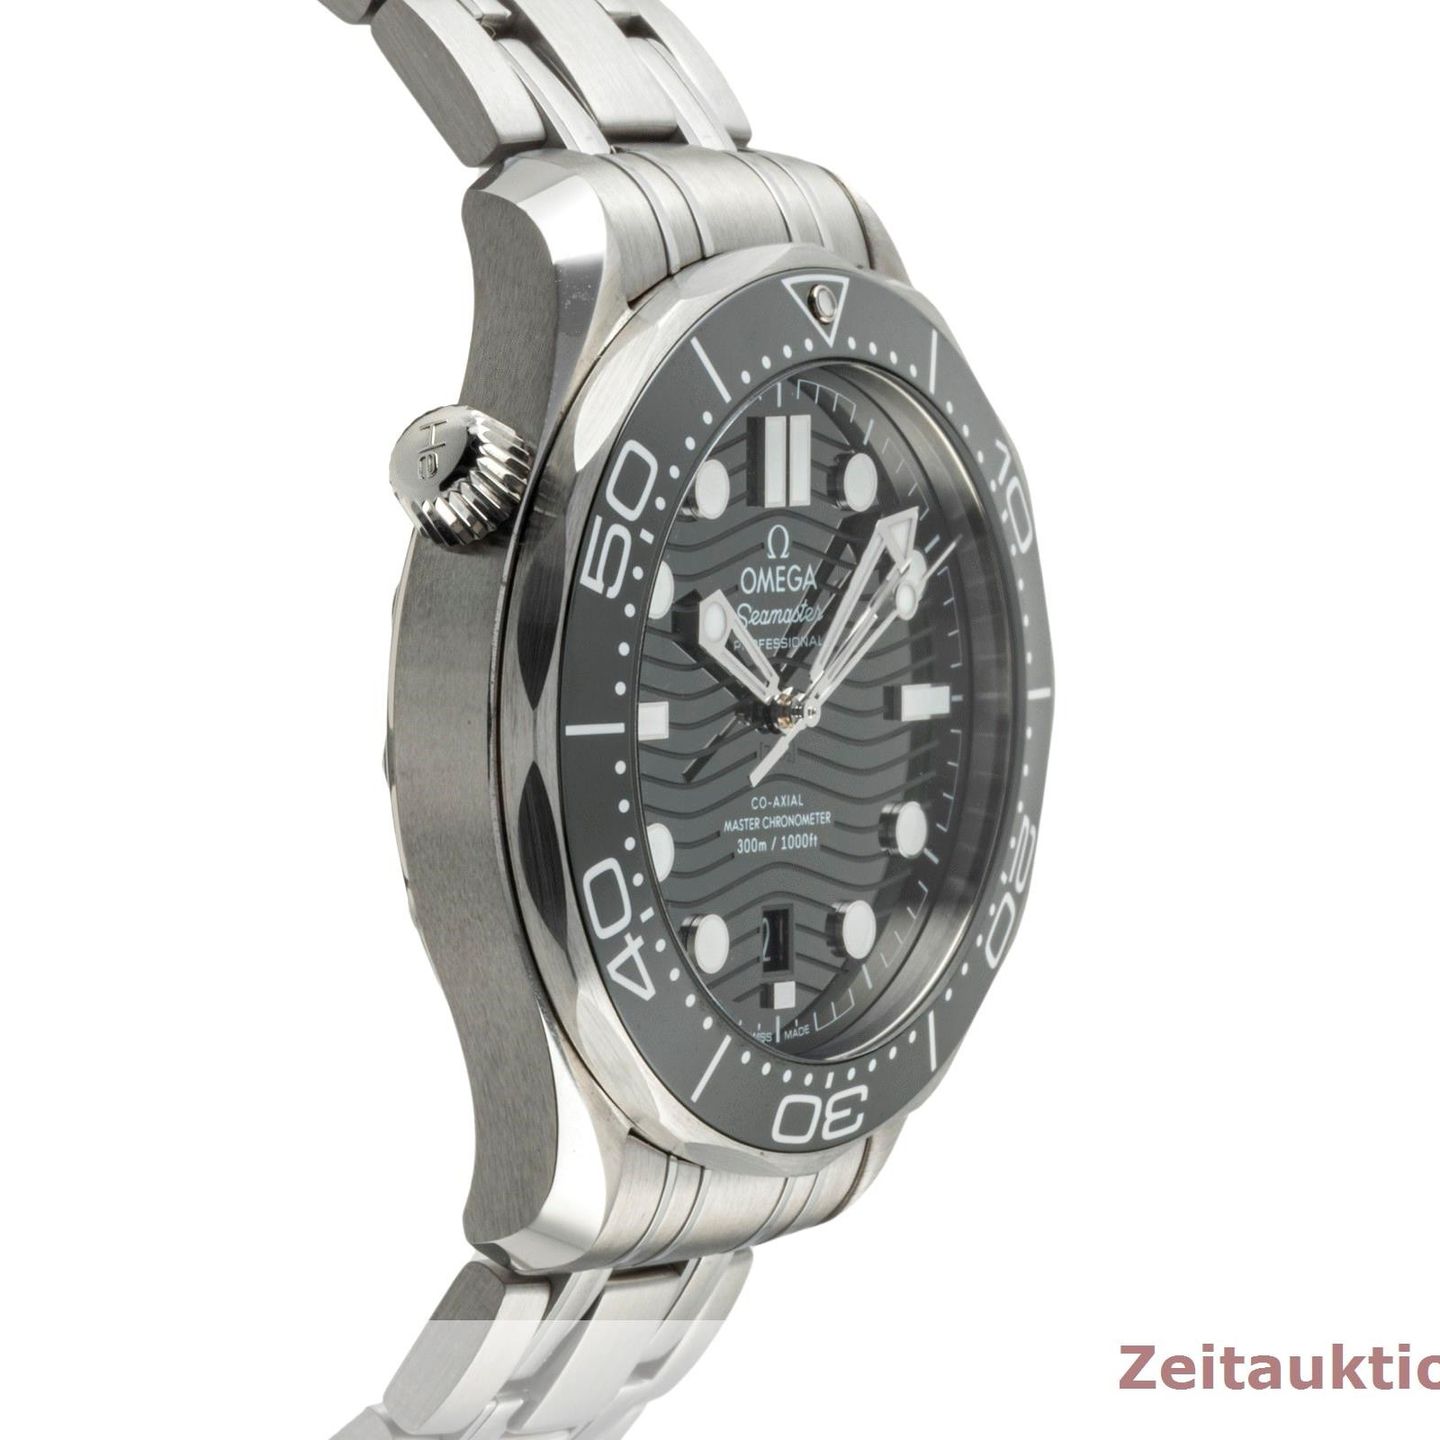 Omega Seamaster Diver 300 M 210.30.42.20.10.001 (Unknown (random serial)) - Green dial 42 mm Steel case (6/8)